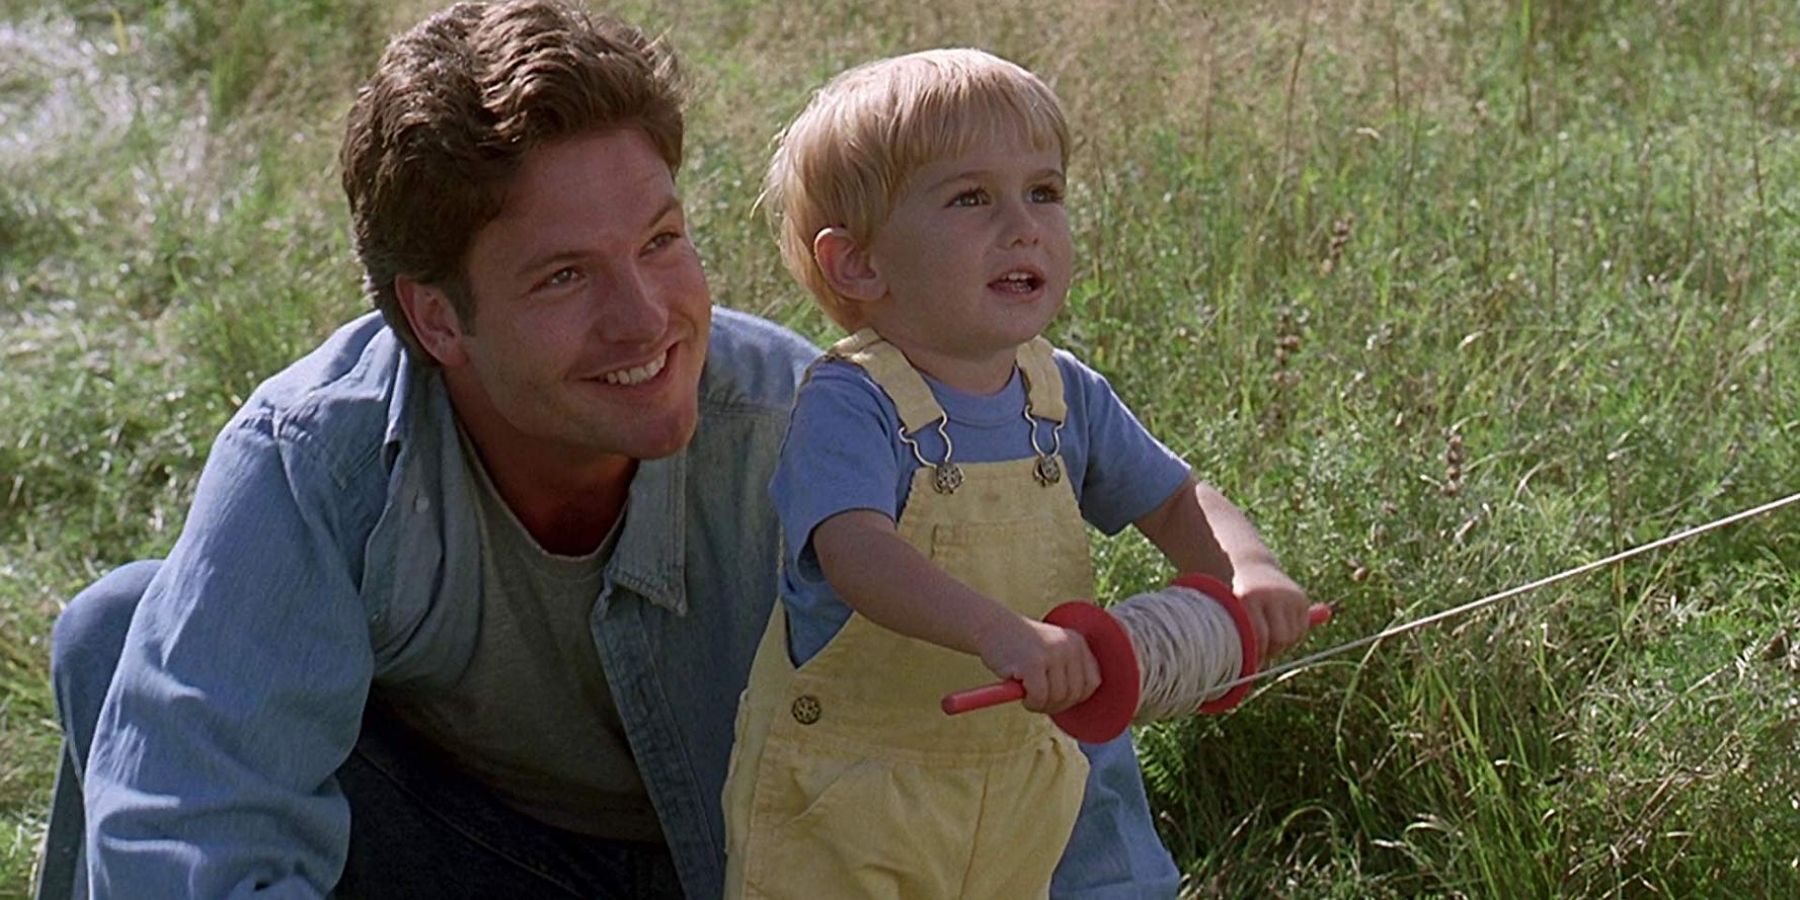 Louis Creed (Dale Midkiff) with his son Gale Creed (Miko Hughes) in Pet Semetary (1989)